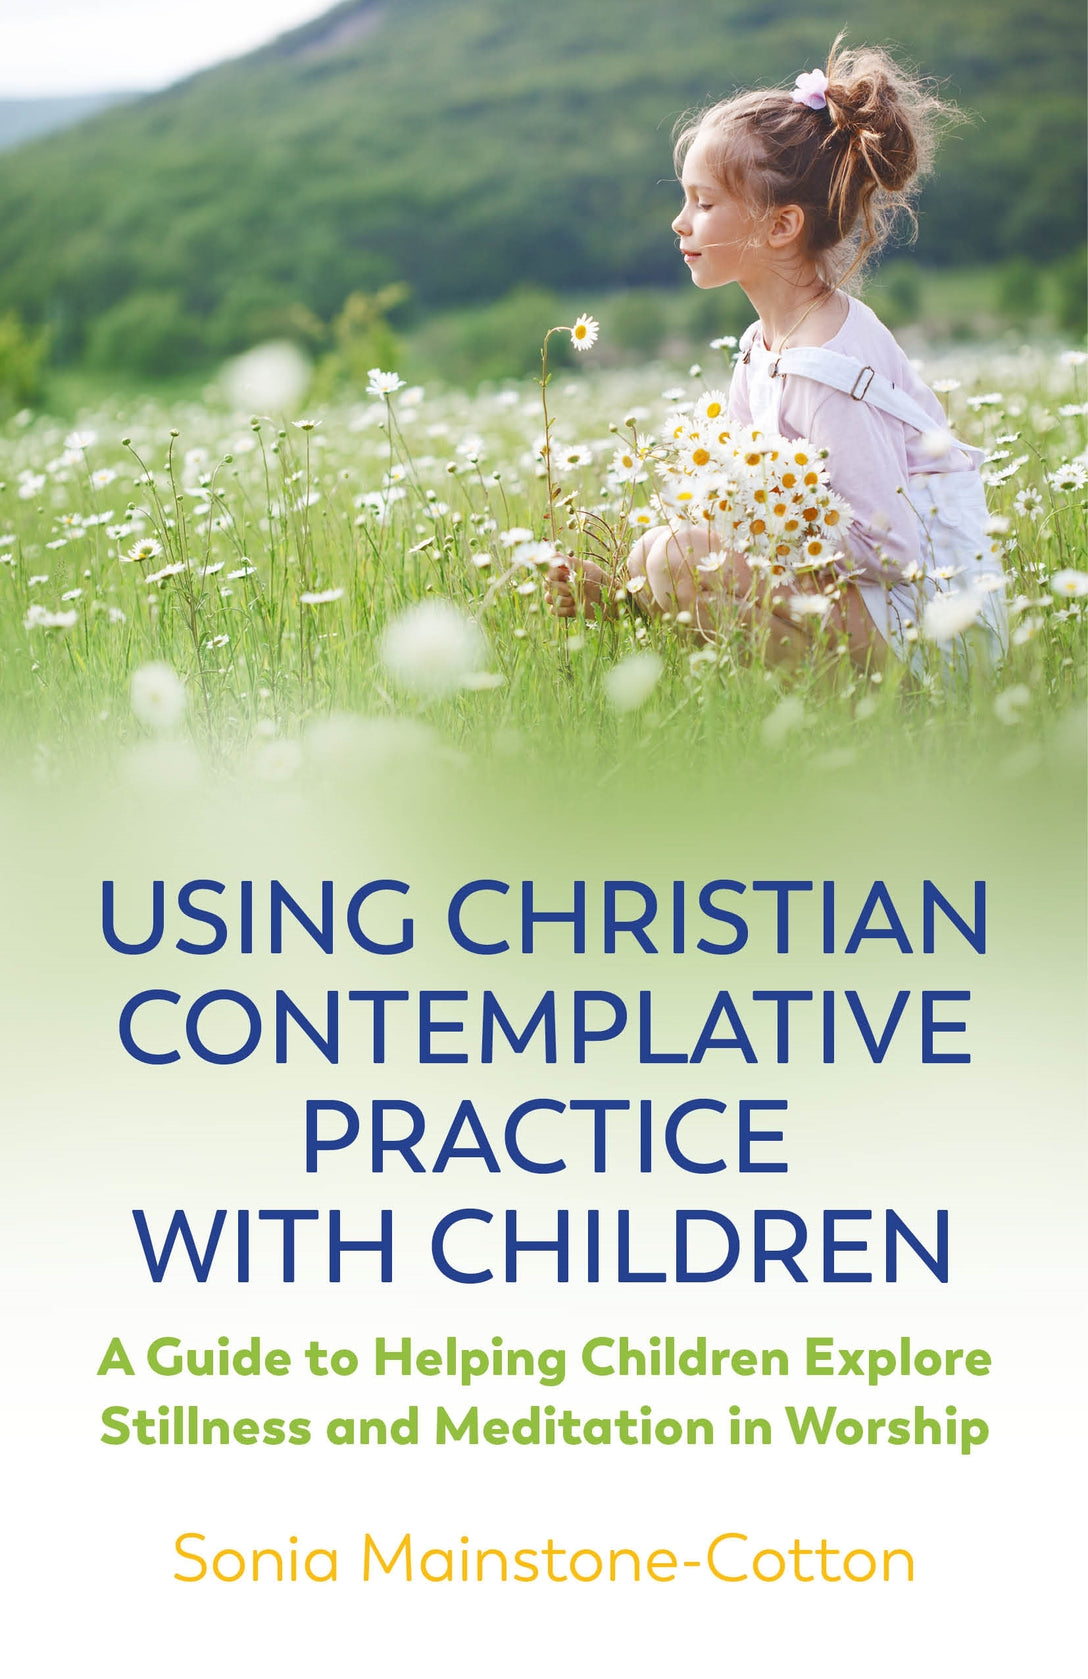 Using Christian Contemplative Practice with Children by Sonia Mainstone-Cotton